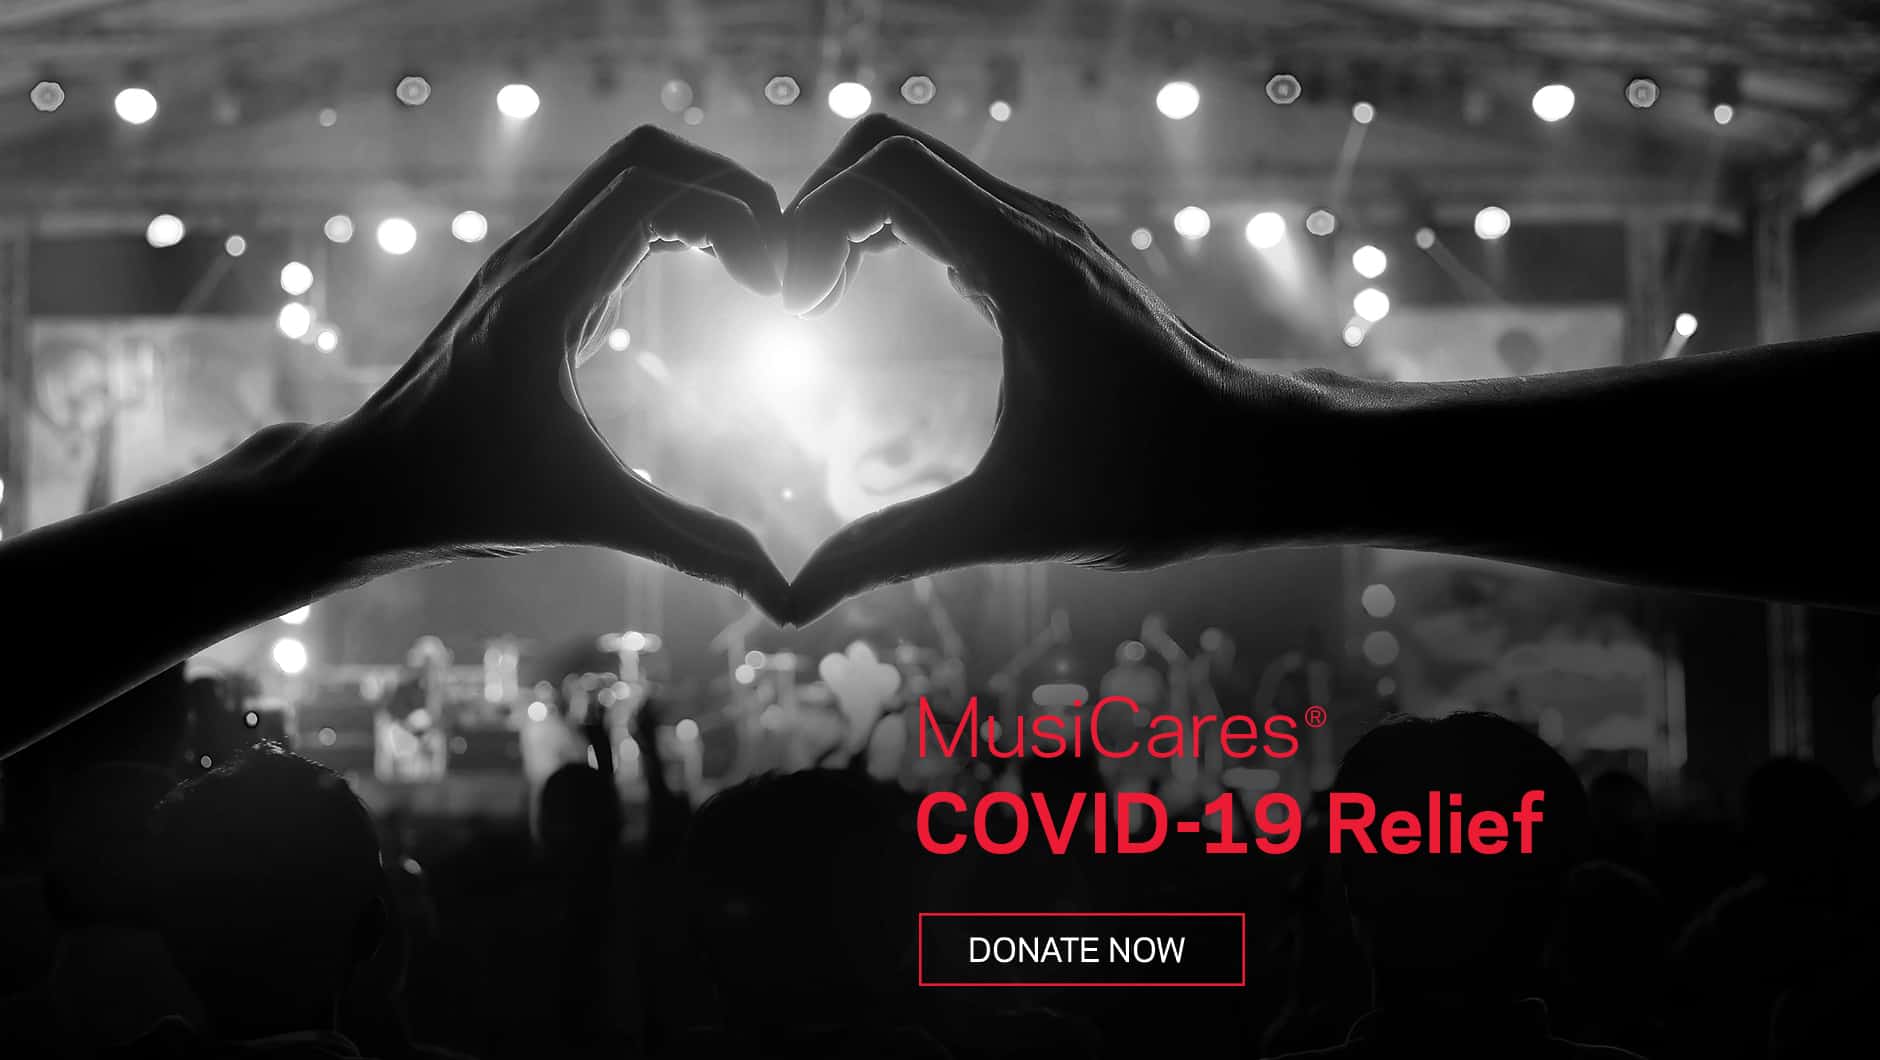 Audio Industry for MusiCares COVID-19 Relief